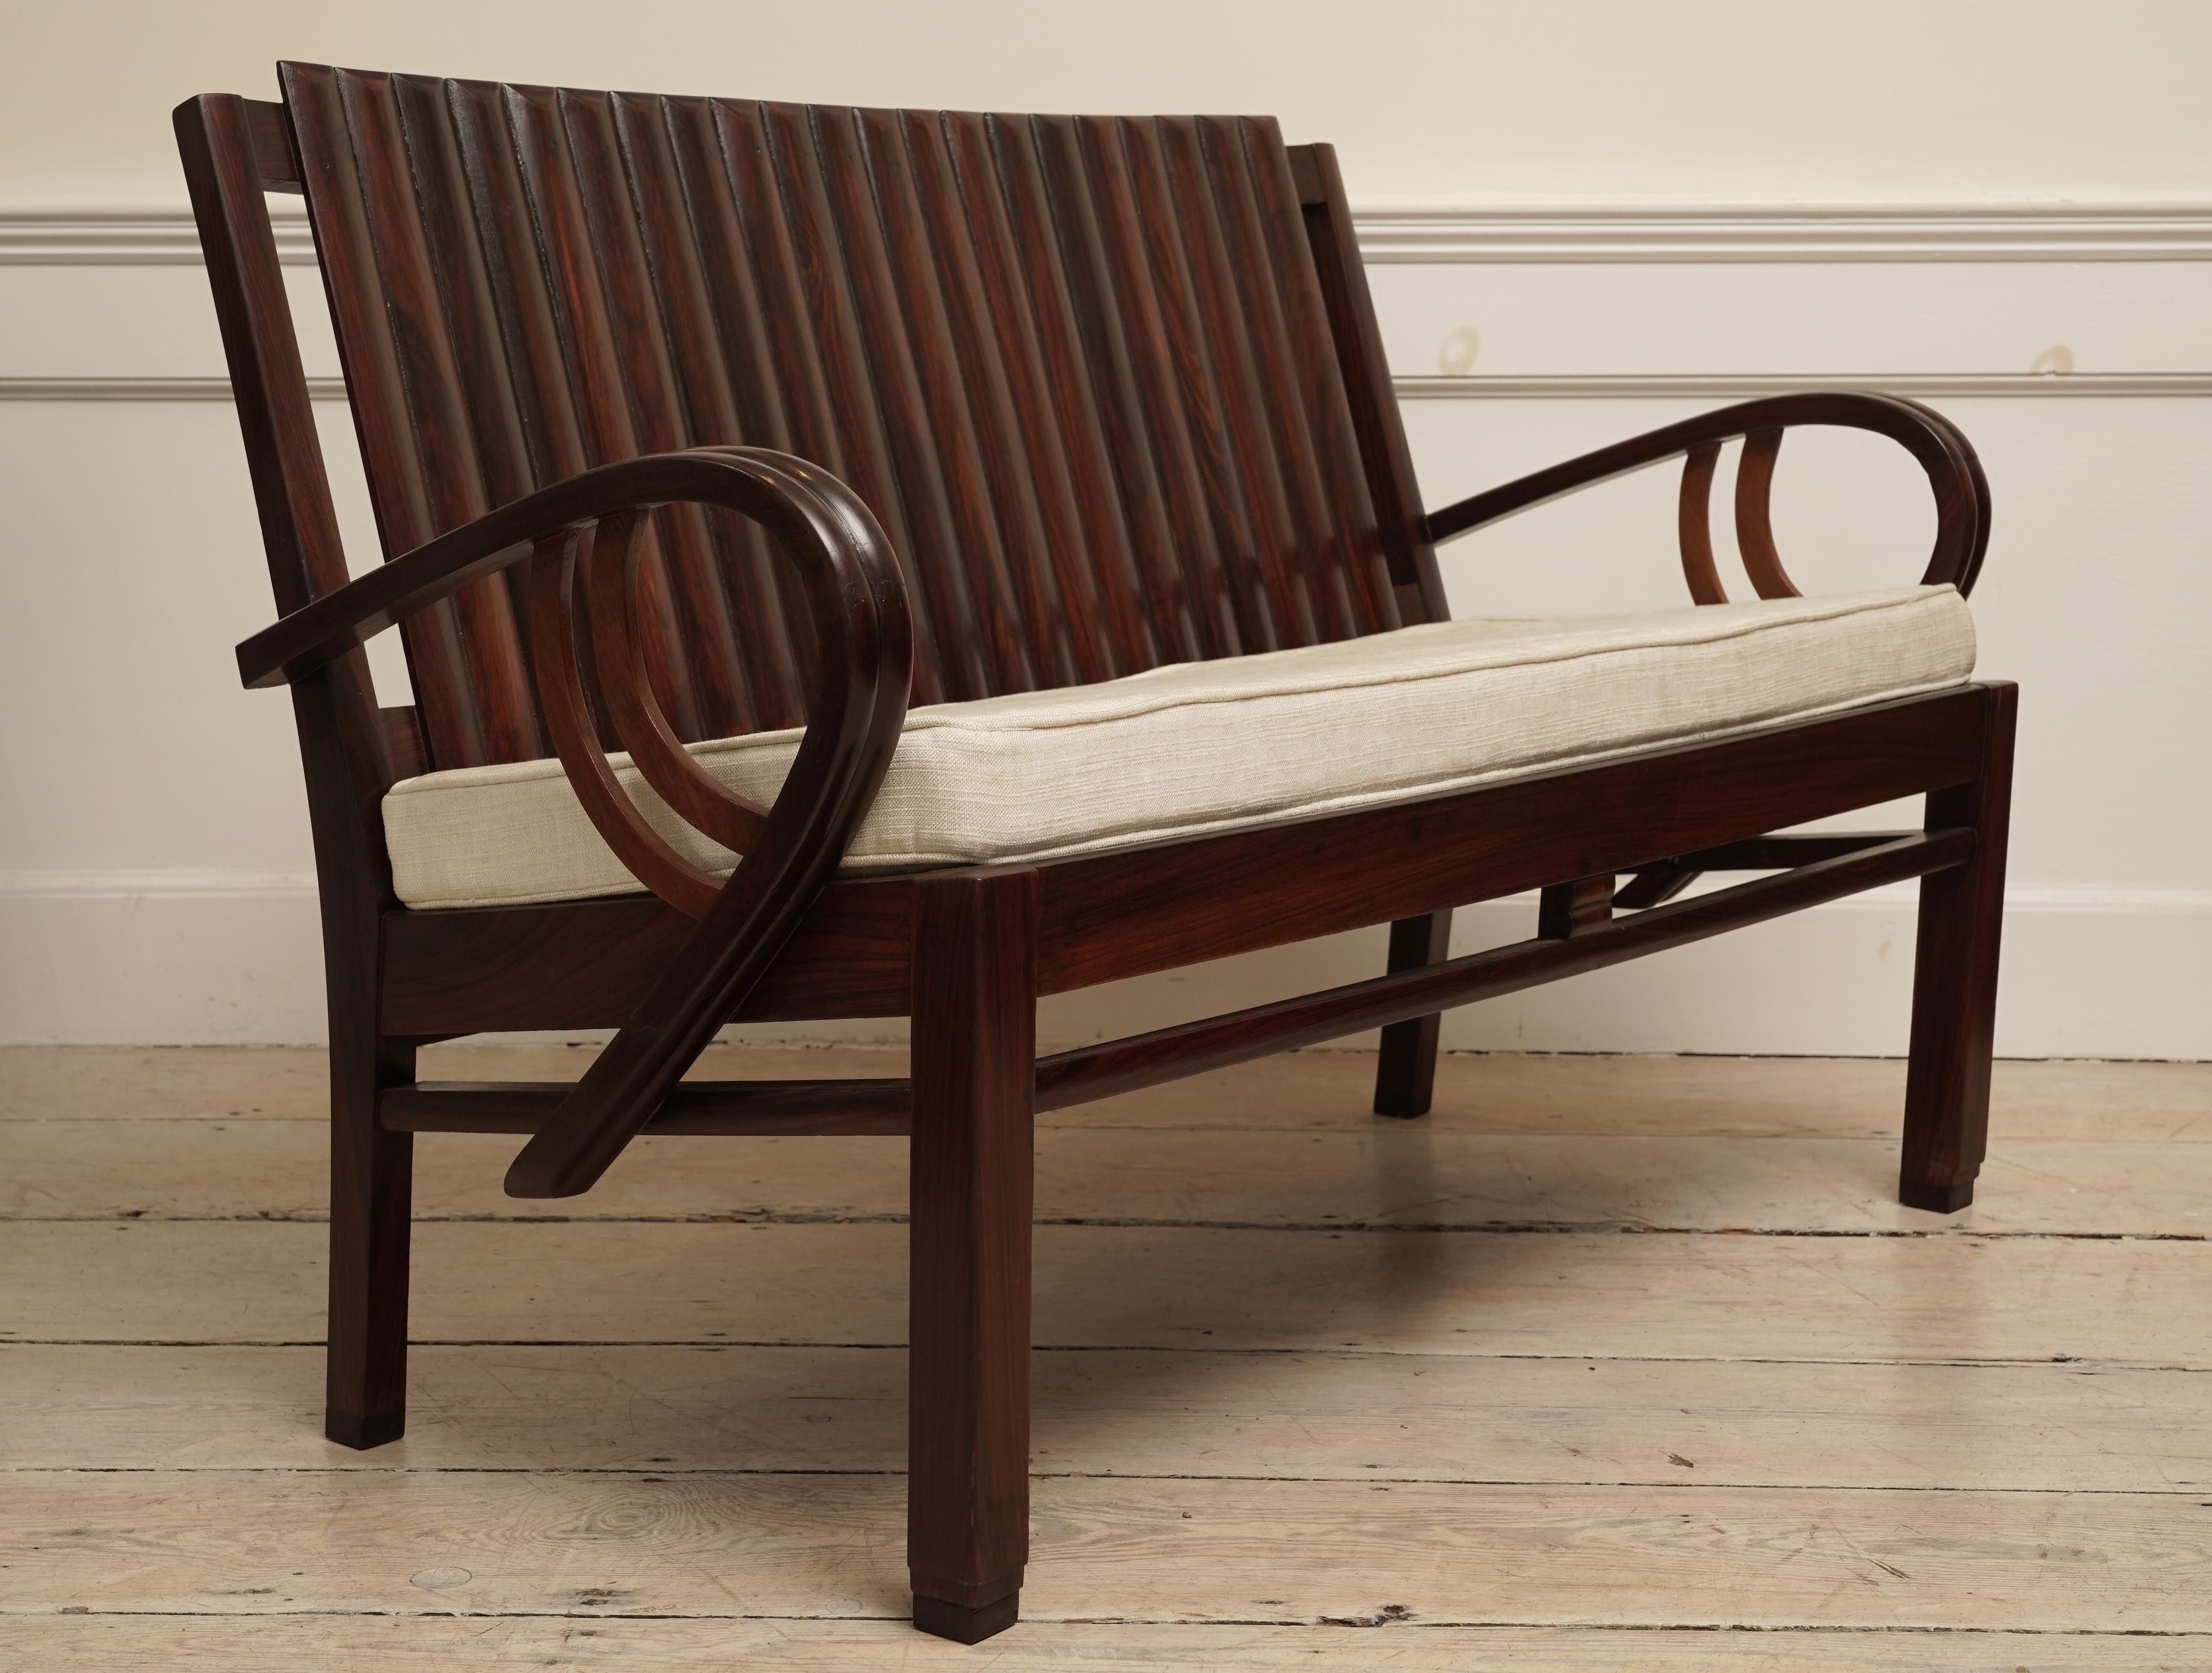 cushions for rosewood chairs